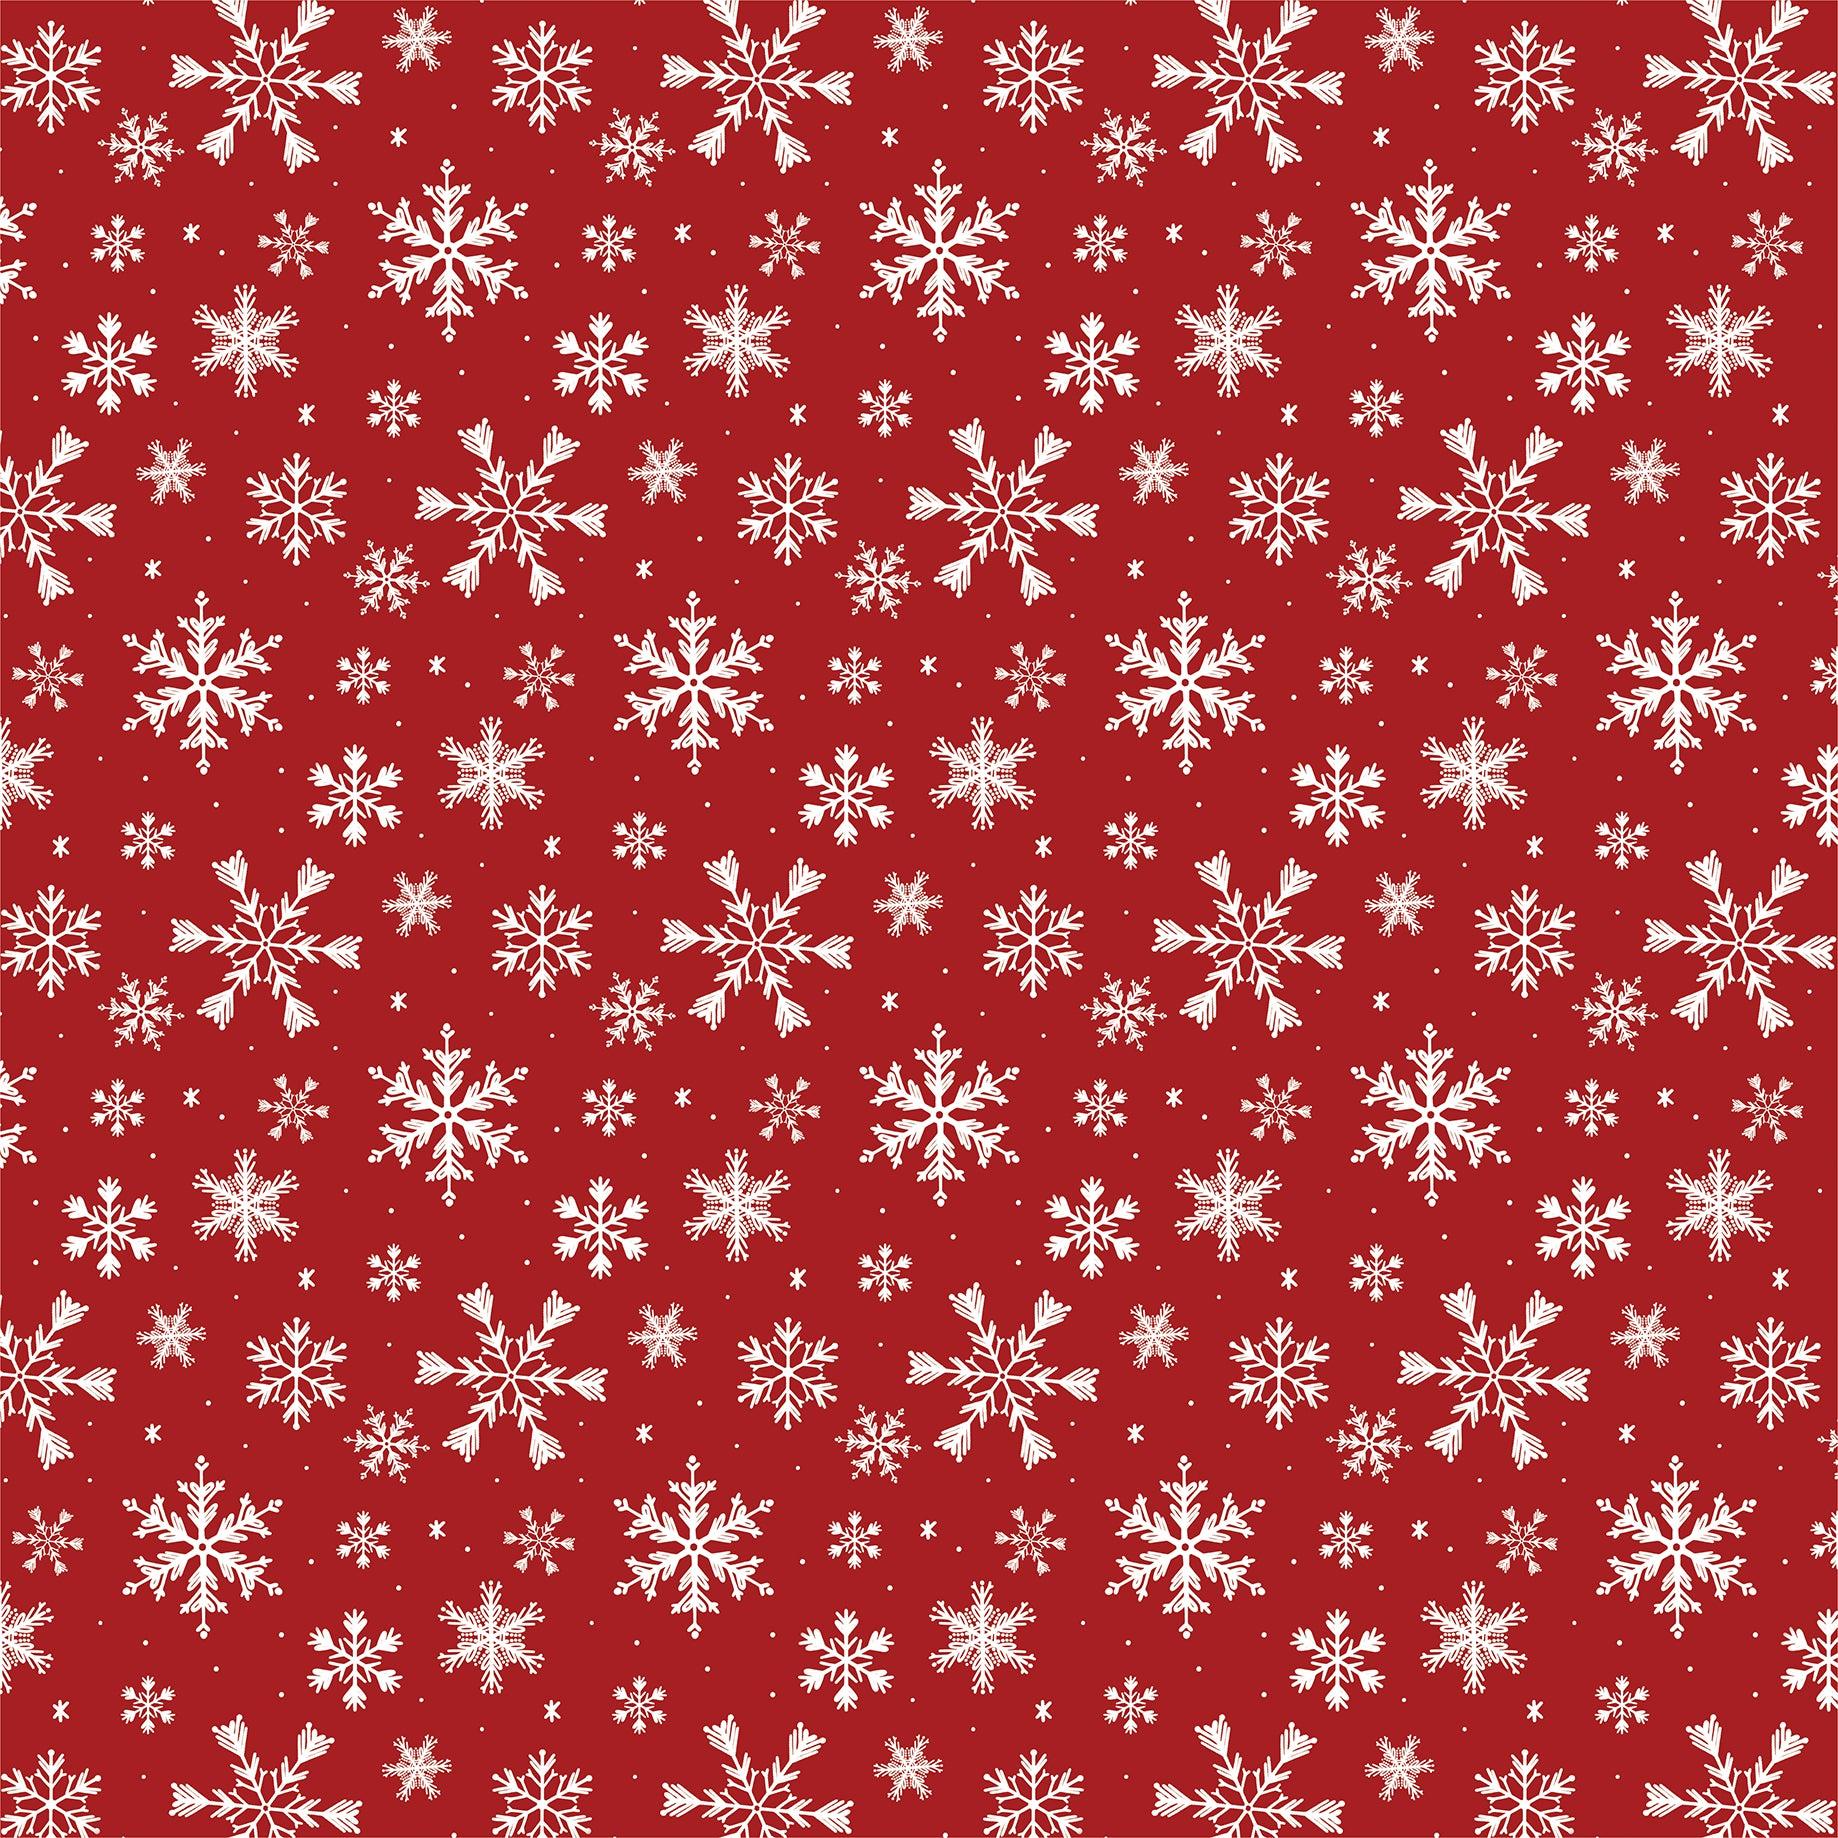 A Wonderful Christmas Collection Holiday Cheer Snow 12 x 12 Double-Sided Scrapbook Paper by Carta Bella - Scrapbook Supply Companies